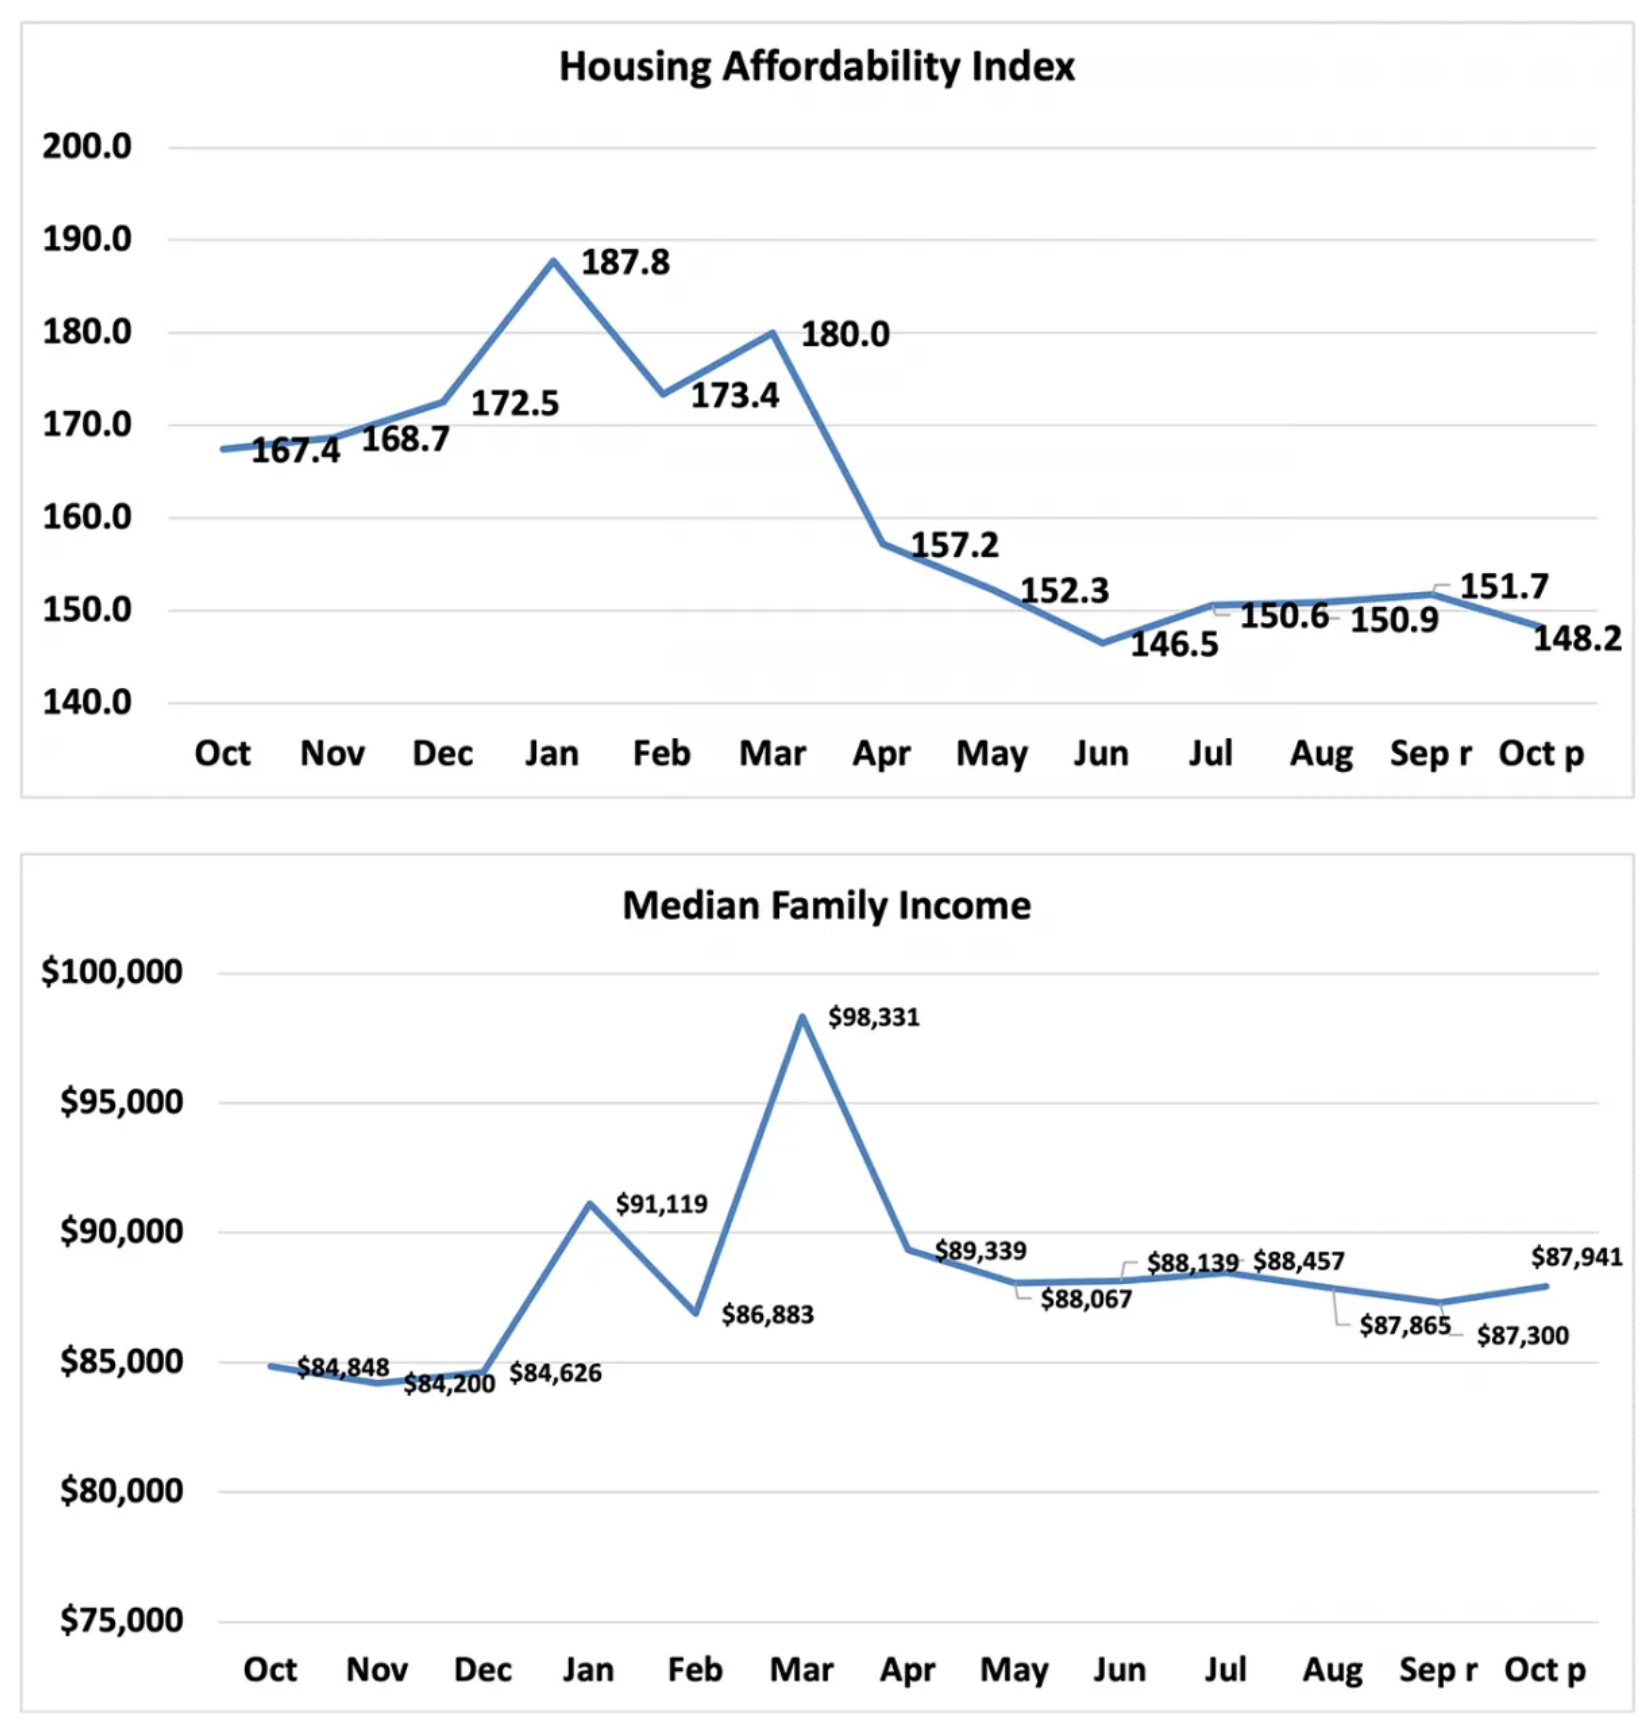 Two line graphs, the top charting the housing affordability index and the other tracking median family income